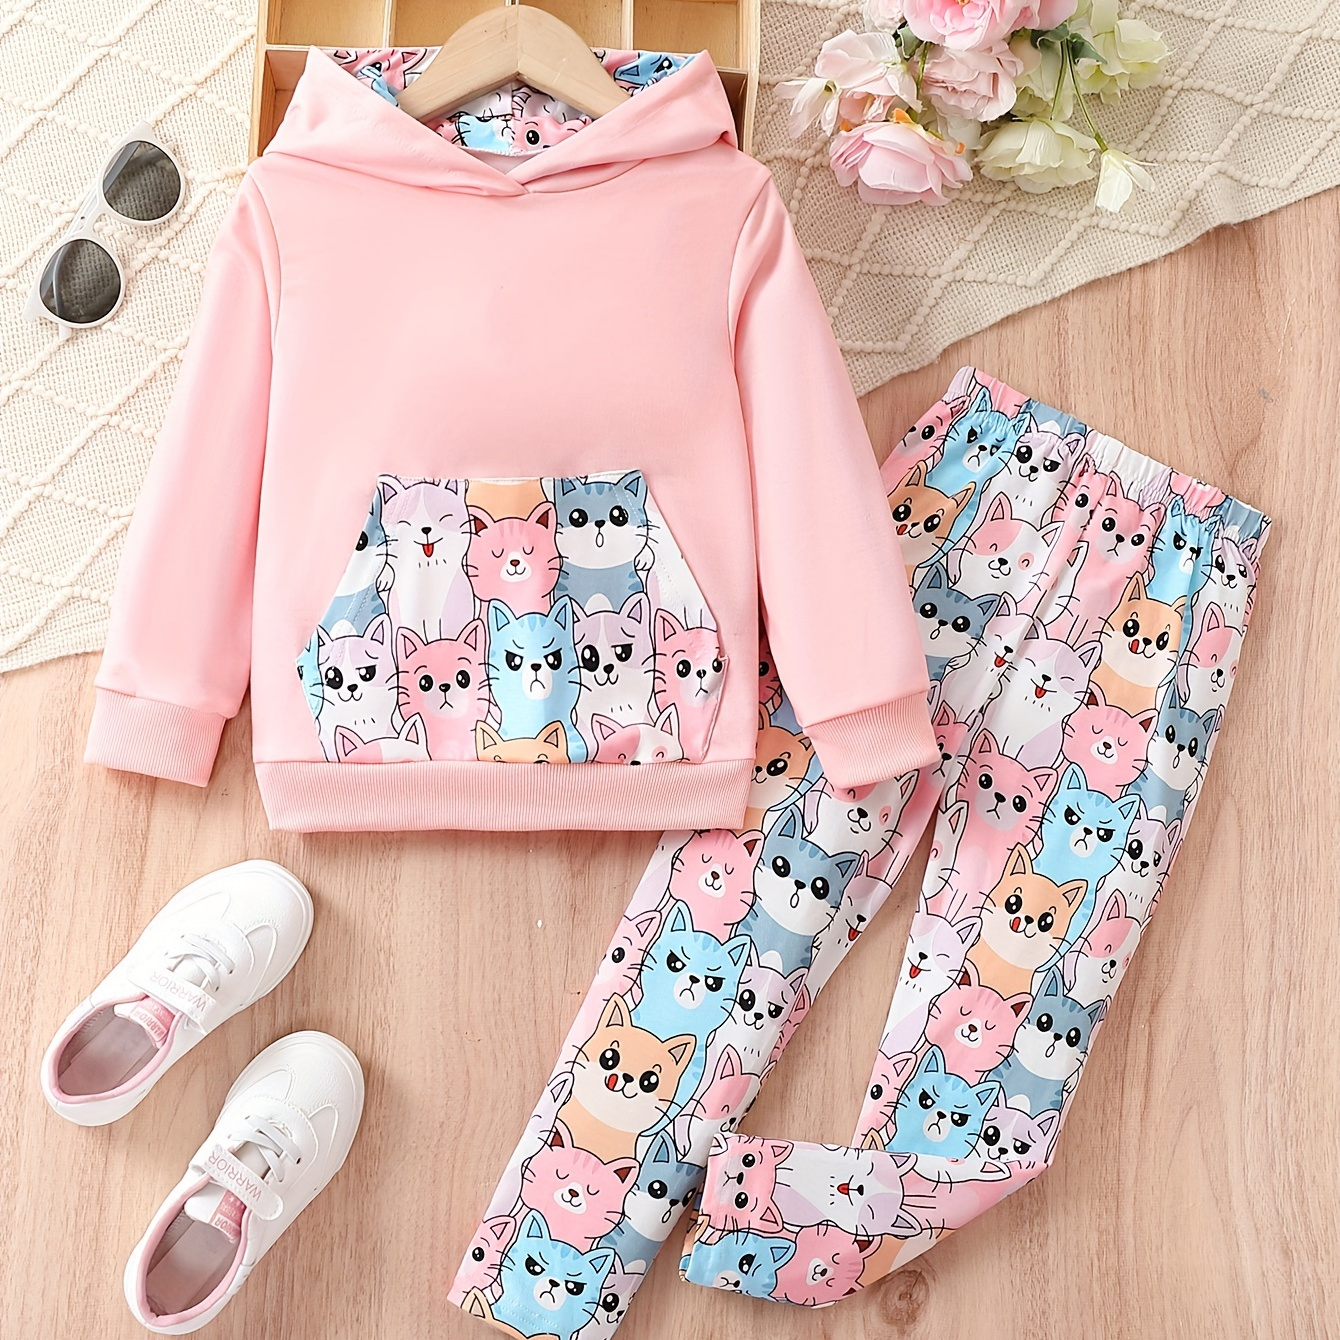 

Girls Cute 2pc Set, Kitten Graphic Set Hoodies With Pocket + Pants Kids Clothes For Spring Fall